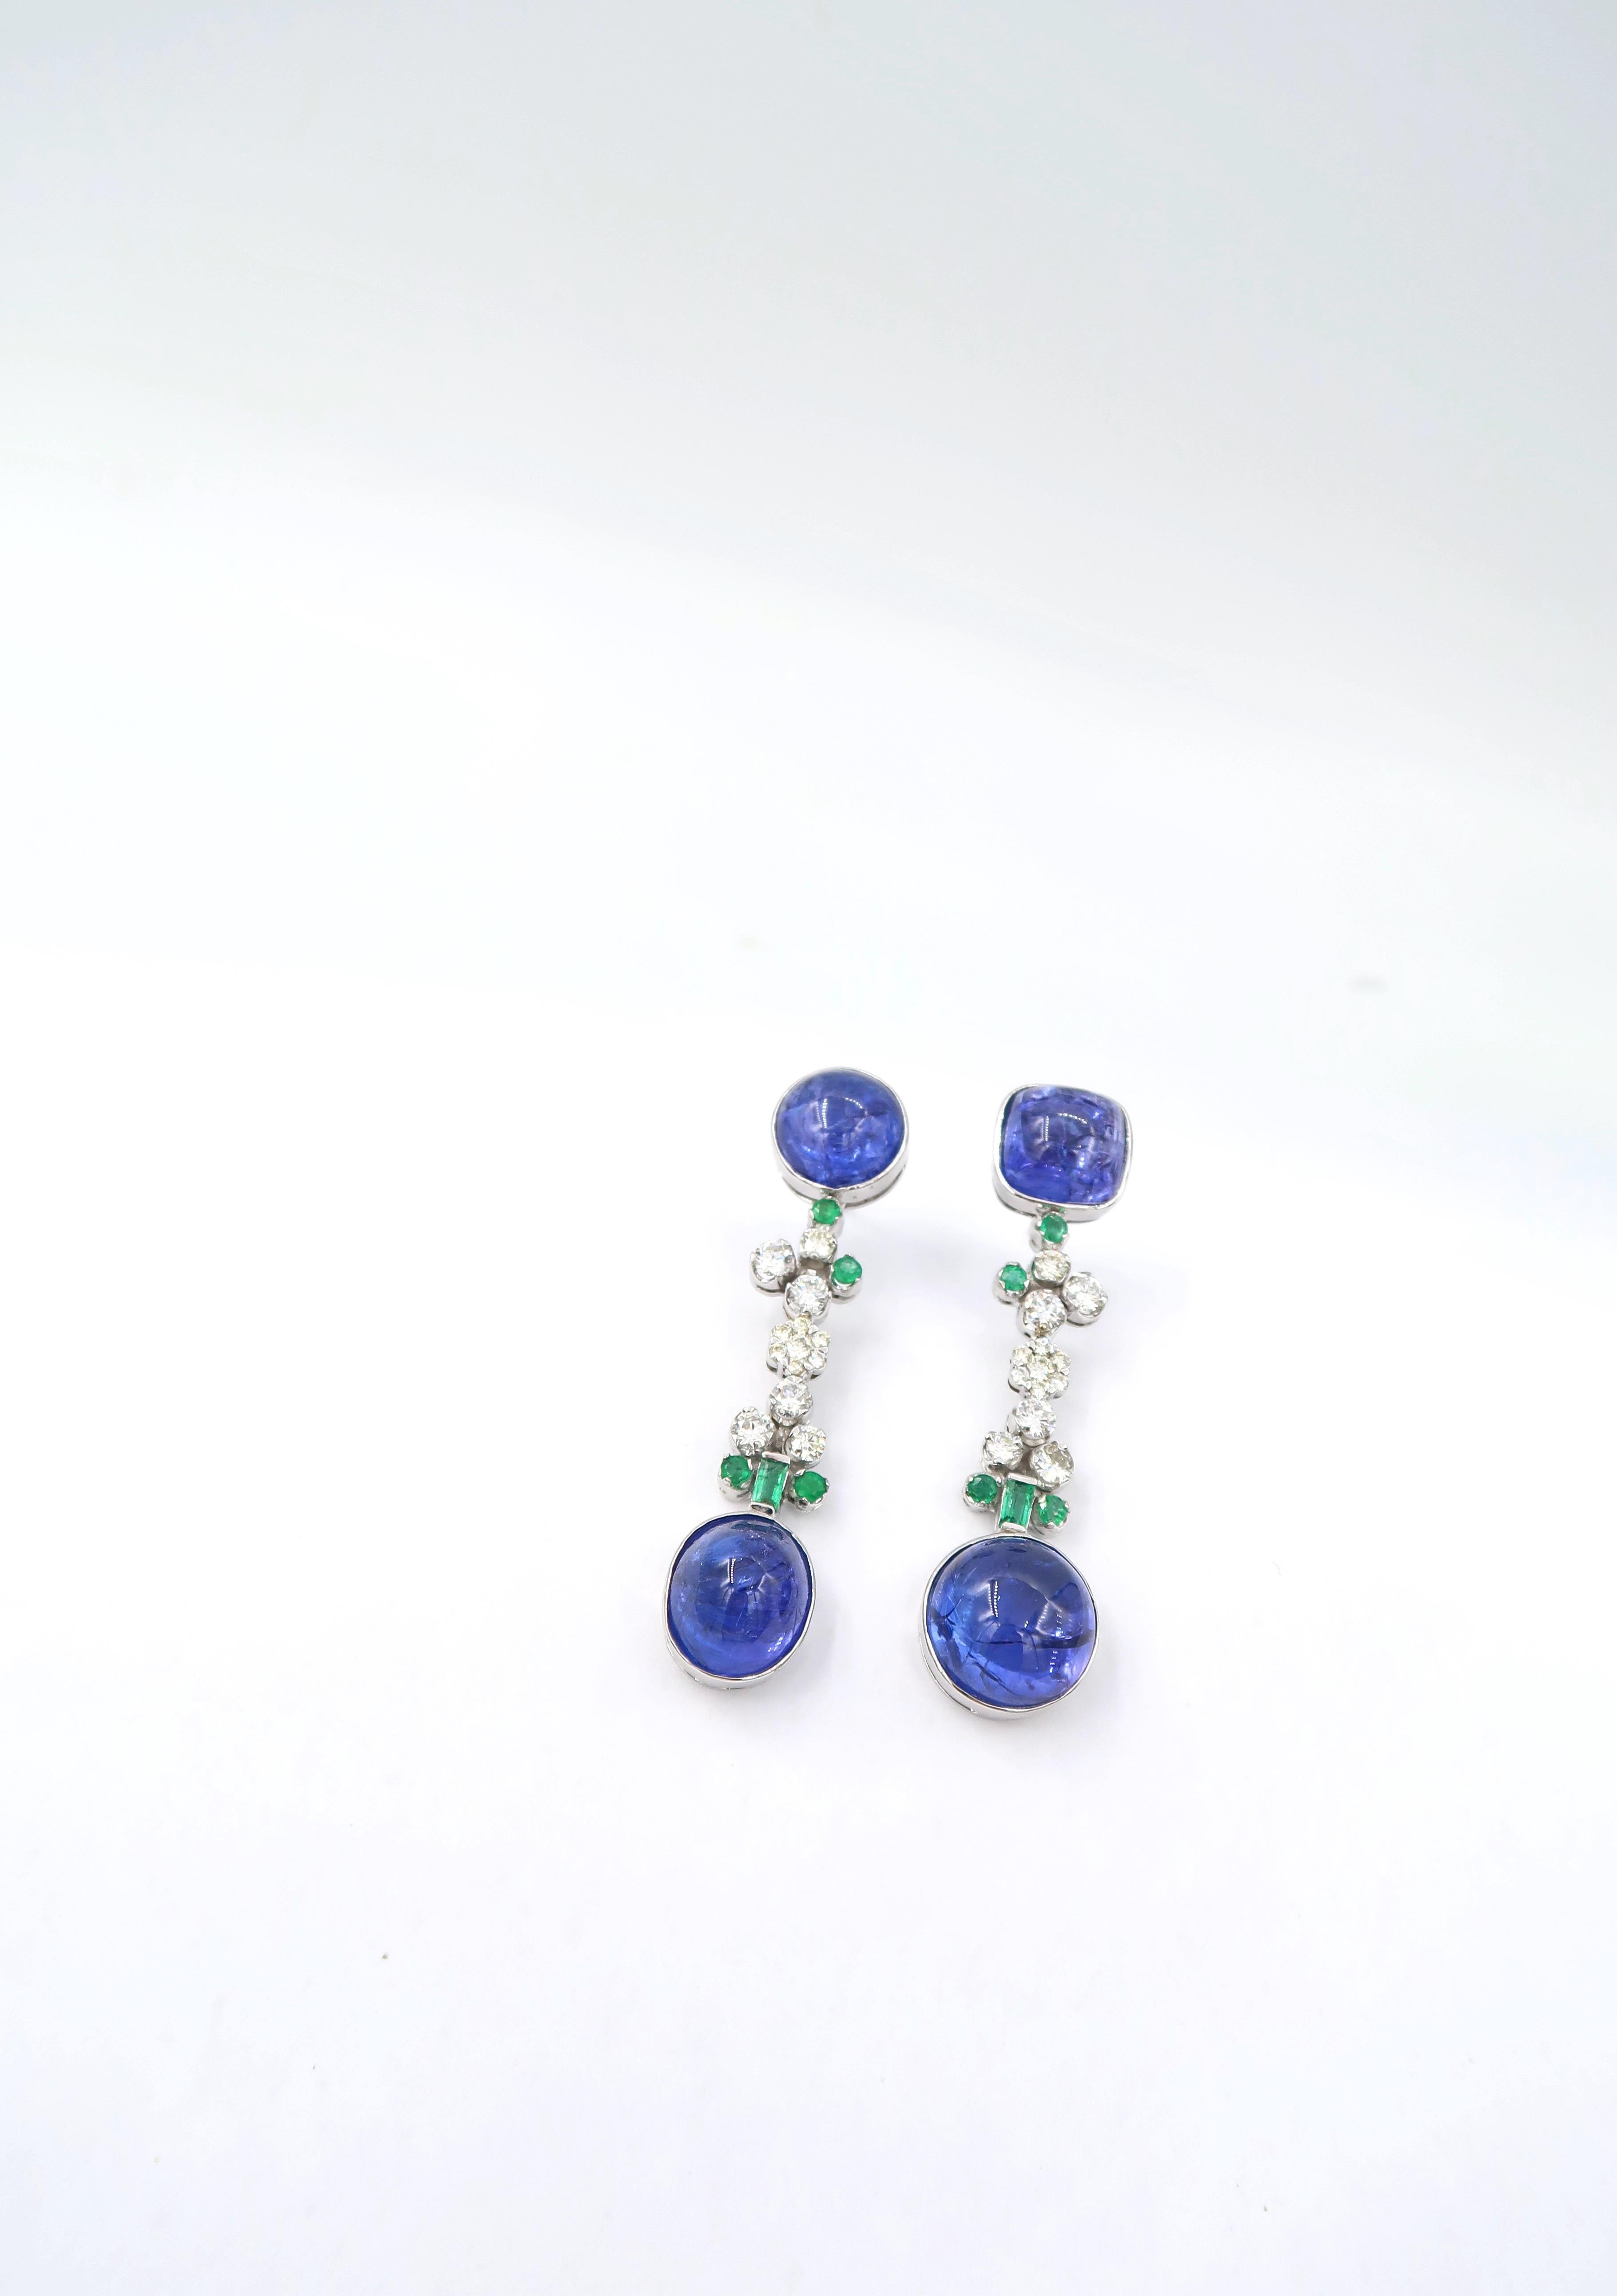 BOON Cabochon Tanzanite Drop Earrings in 18K White Gold with Emerald and Diamonds

Gold: 18K White Gold 17.28g.
Diamond: 1.38ct.
Tanzanite: Cabochon 34.70ct.
Emerald: 0.74ct.